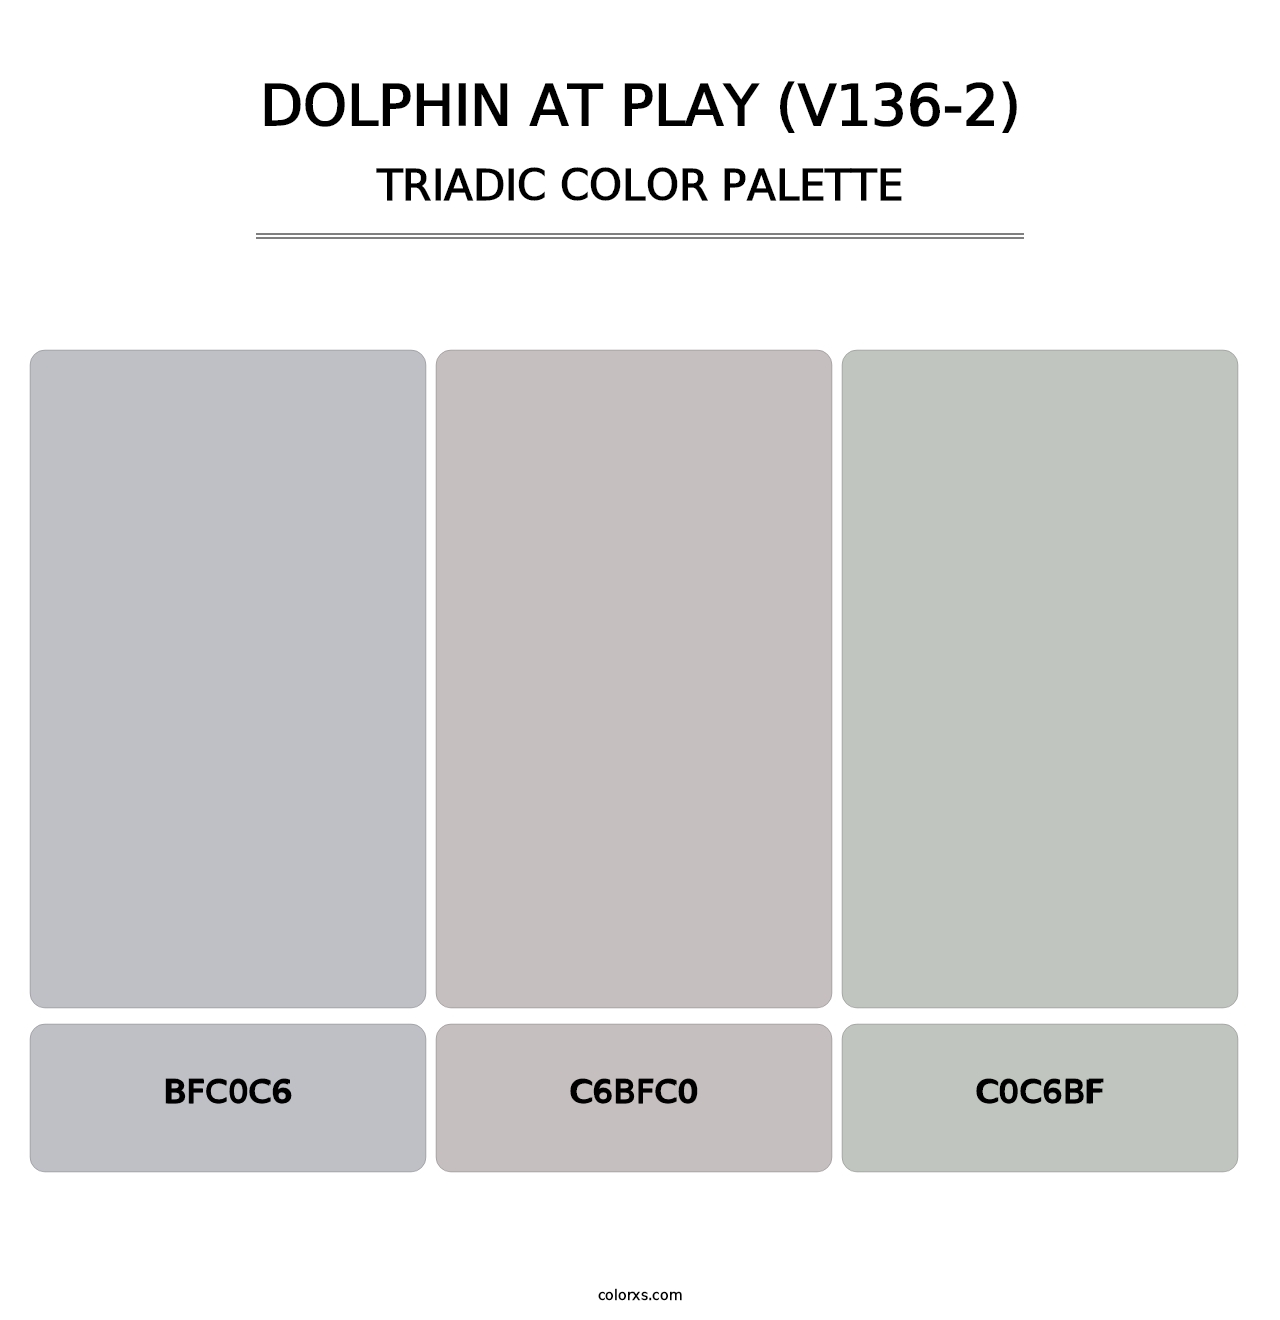 Dolphin at Play (V136-2) - Triadic Color Palette